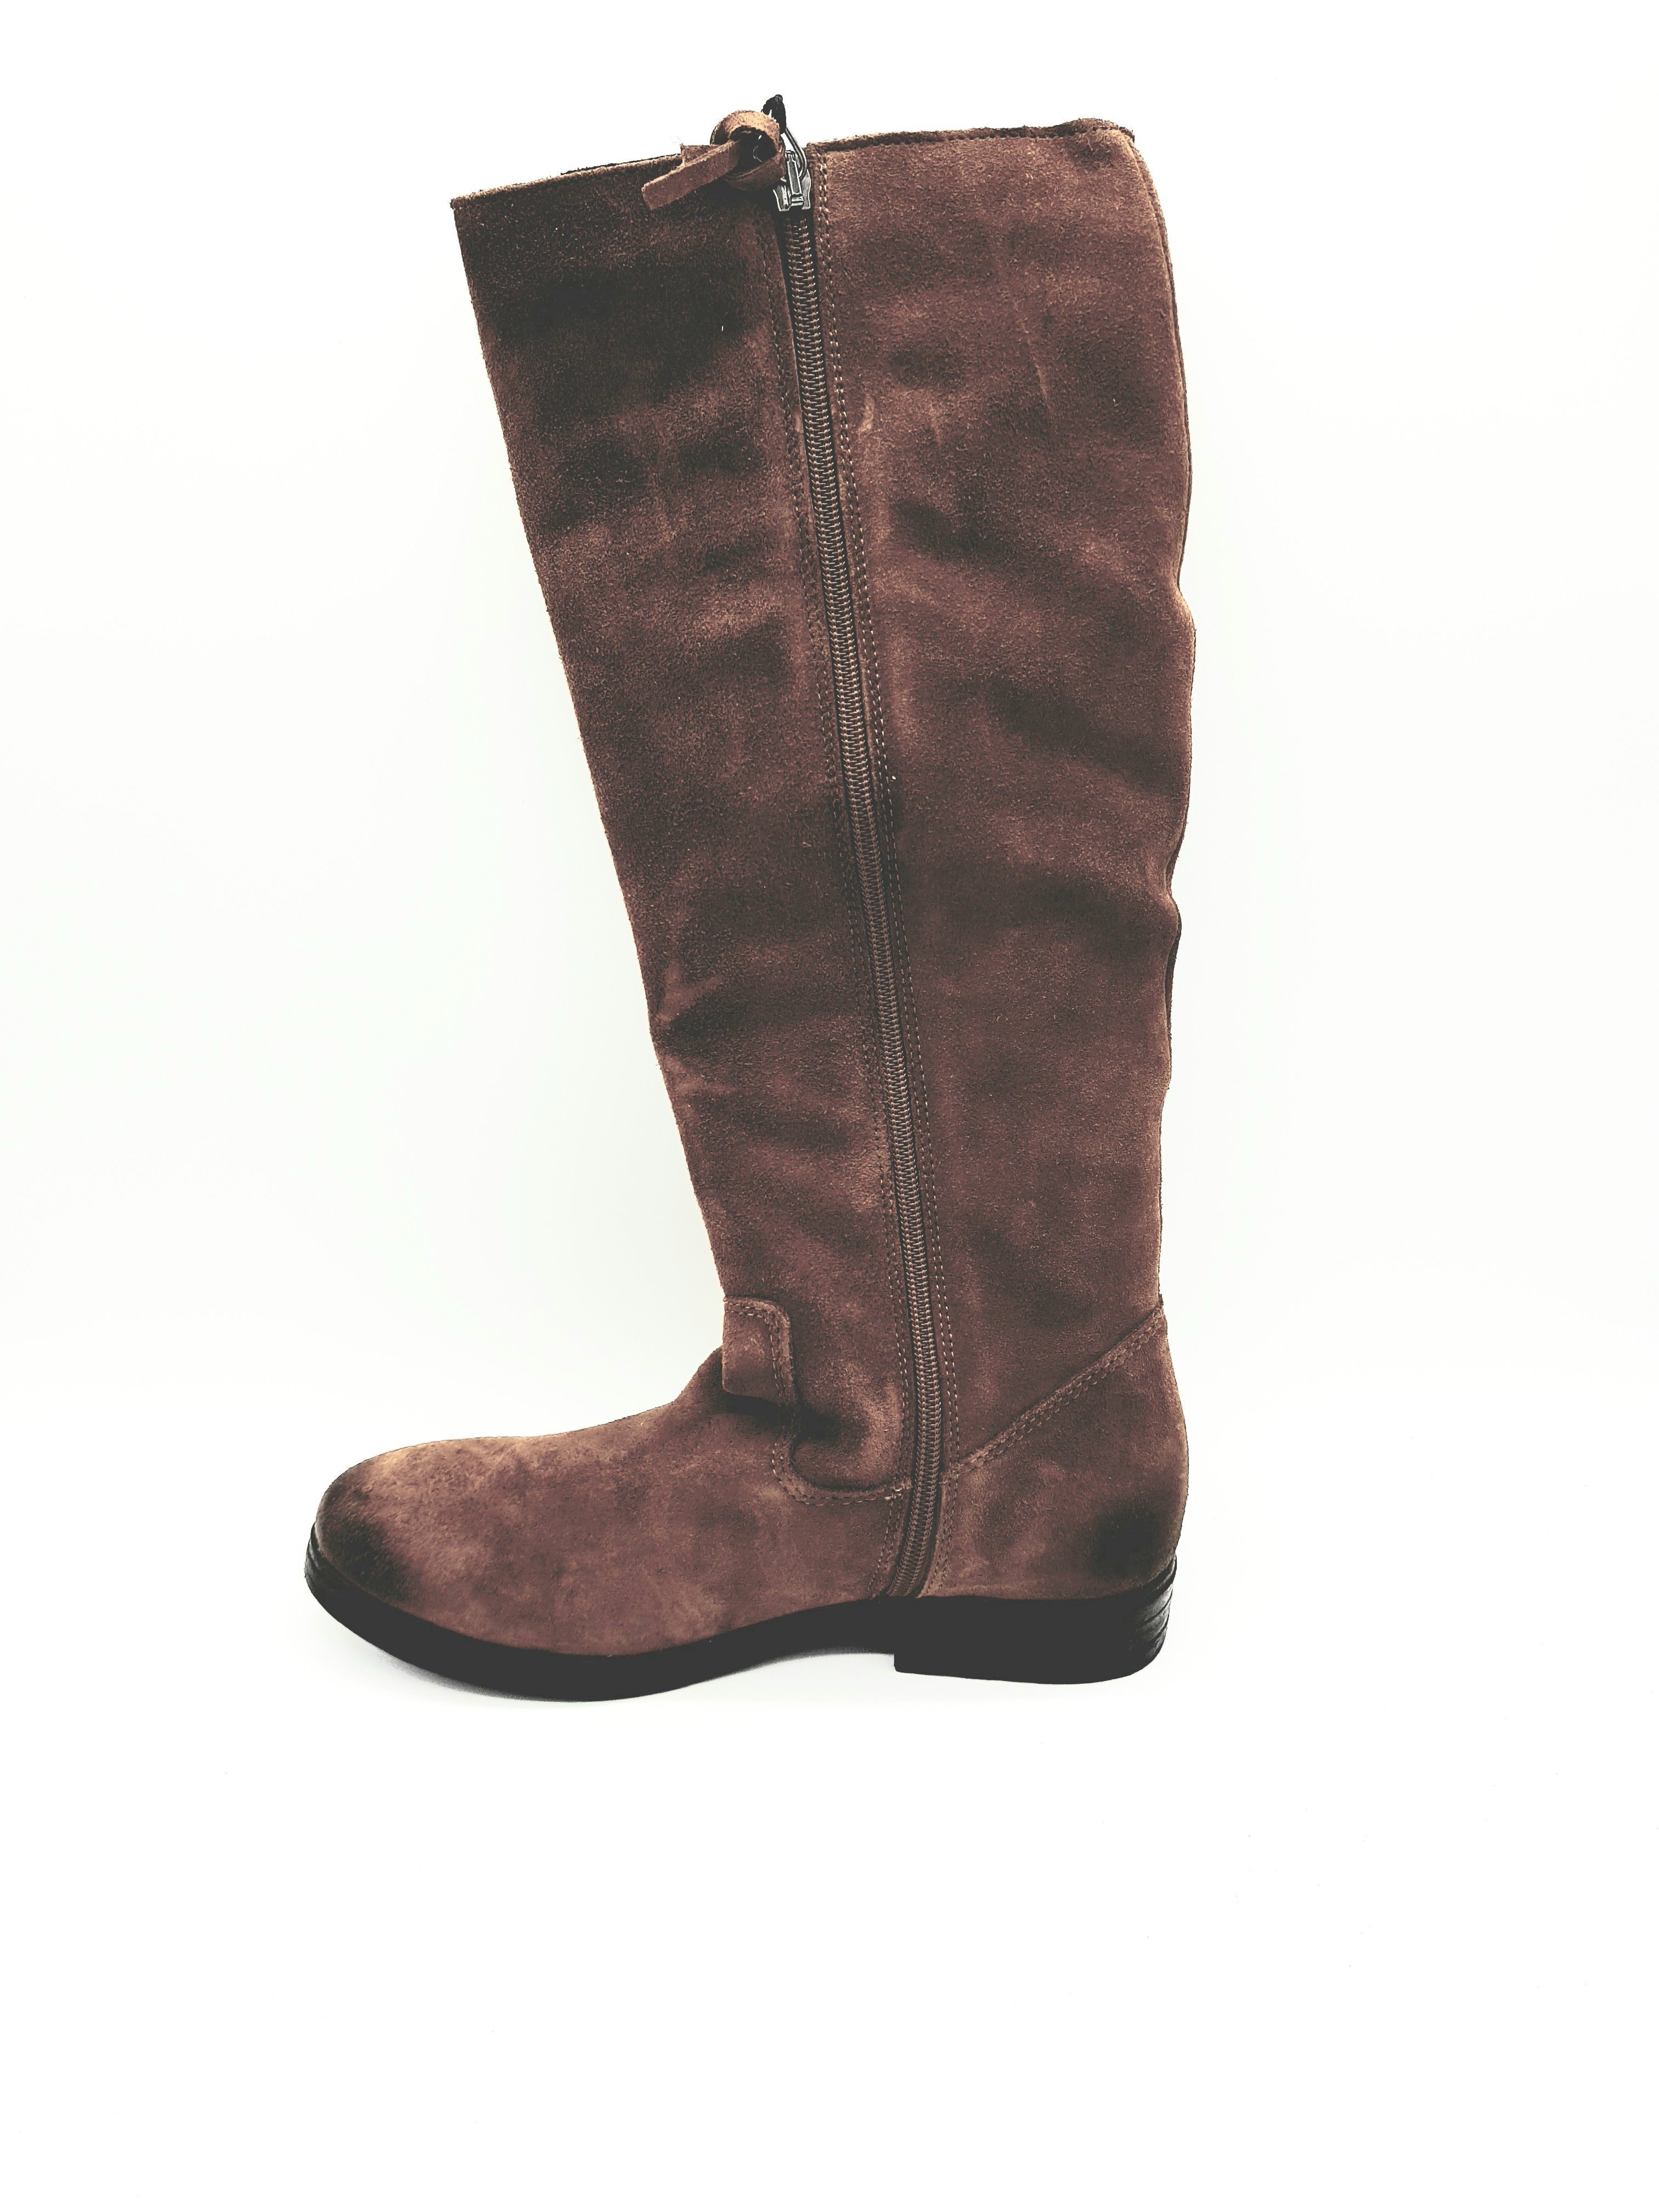 Schuhe Stiefel Replay Replay Stiefel brown FF.RL33 Stiefel